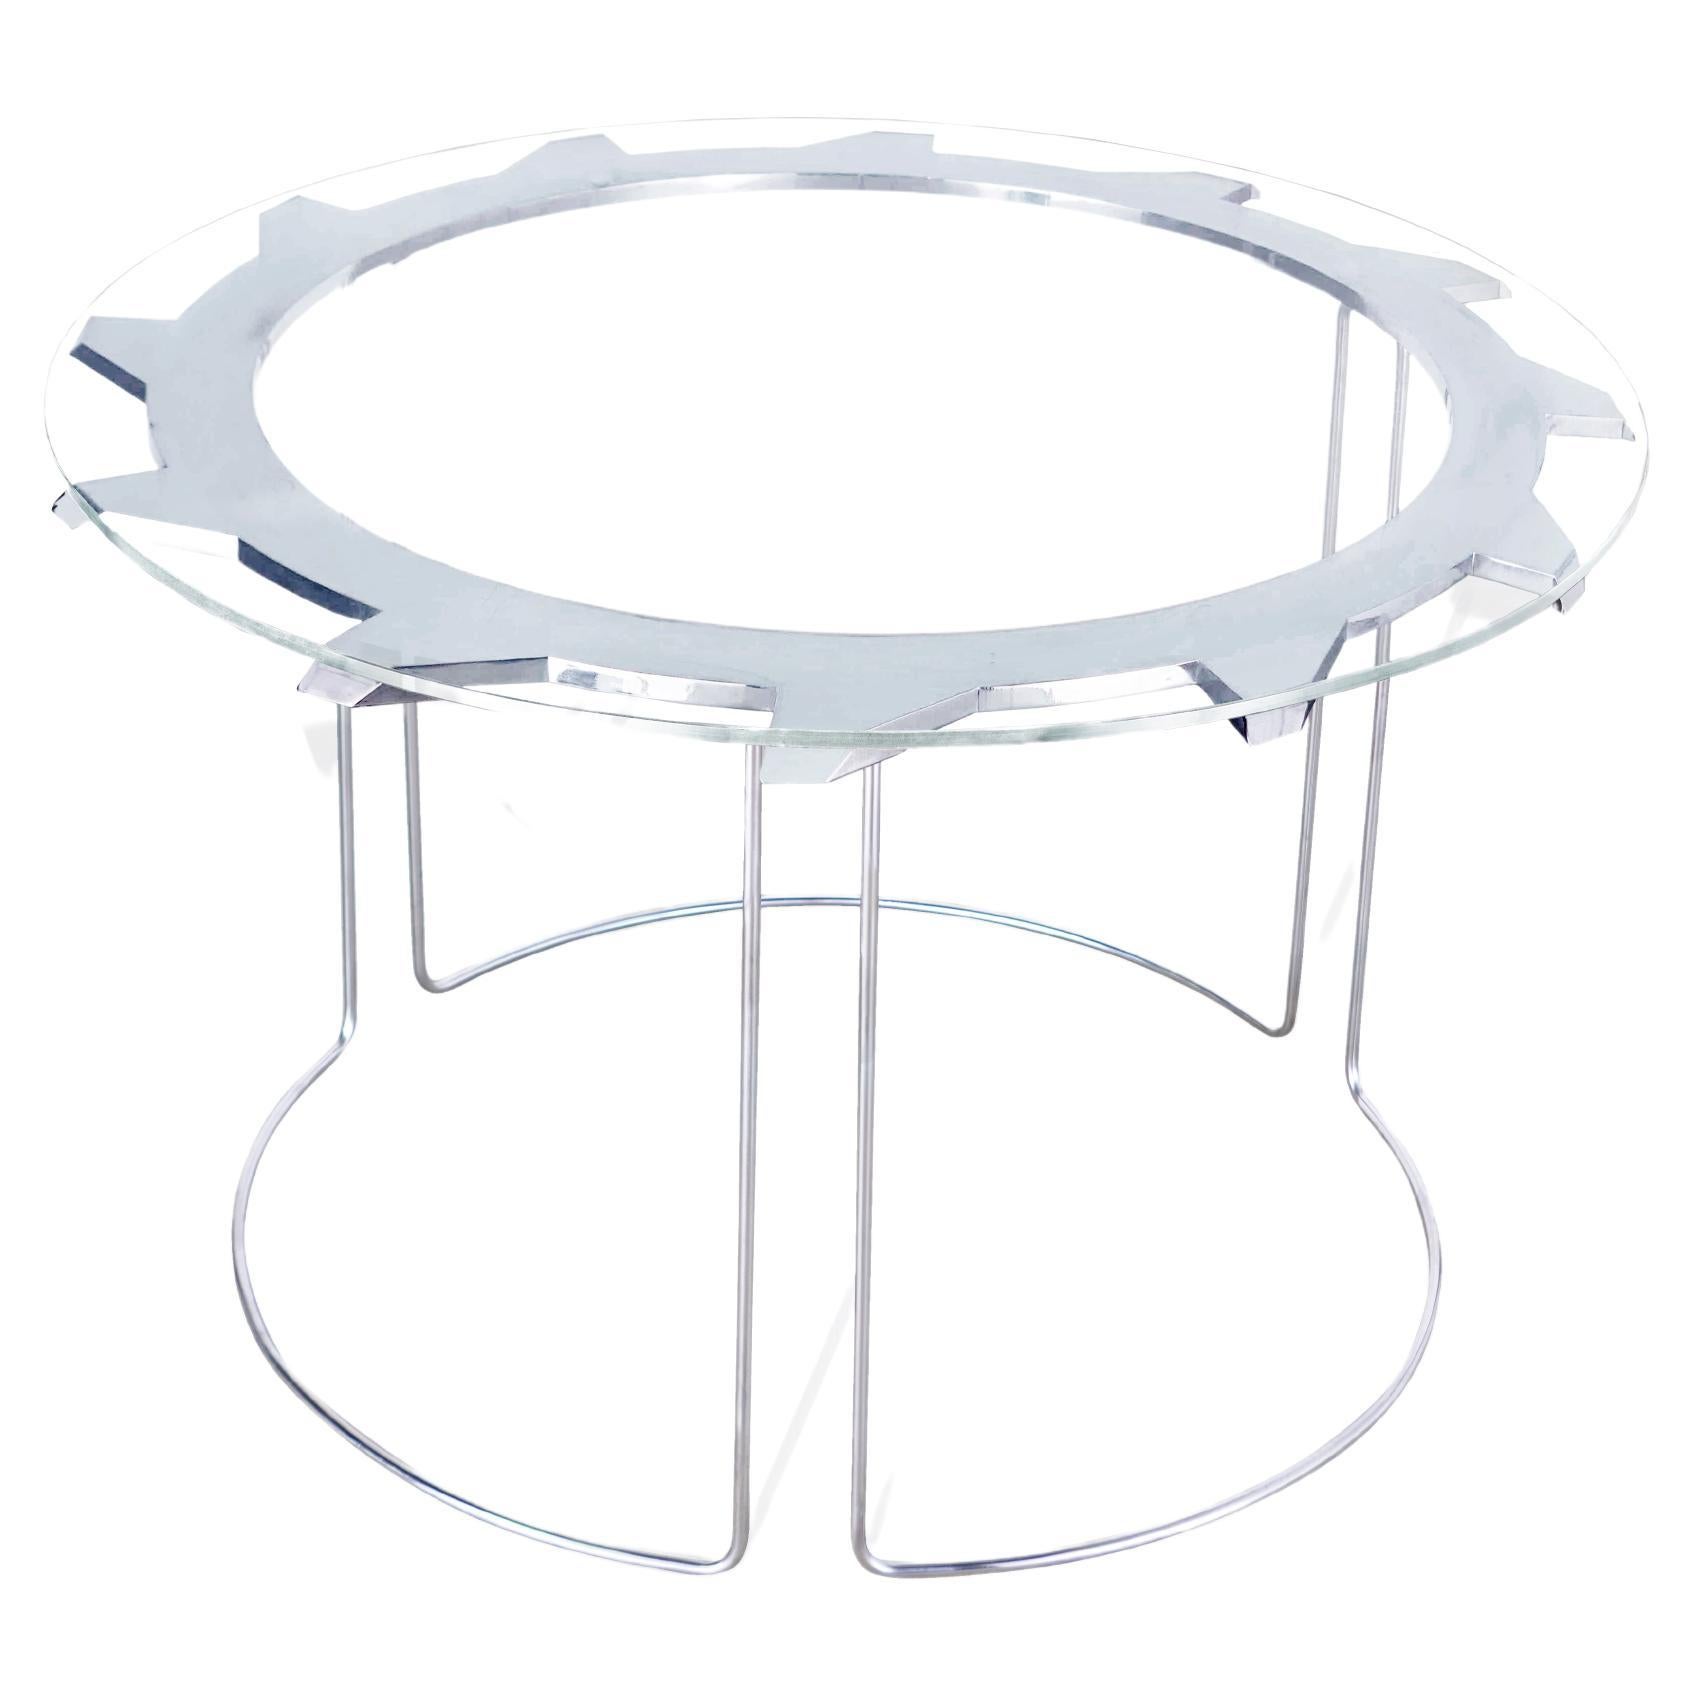 Buzzsaw Dining Table – Mirror For Sale